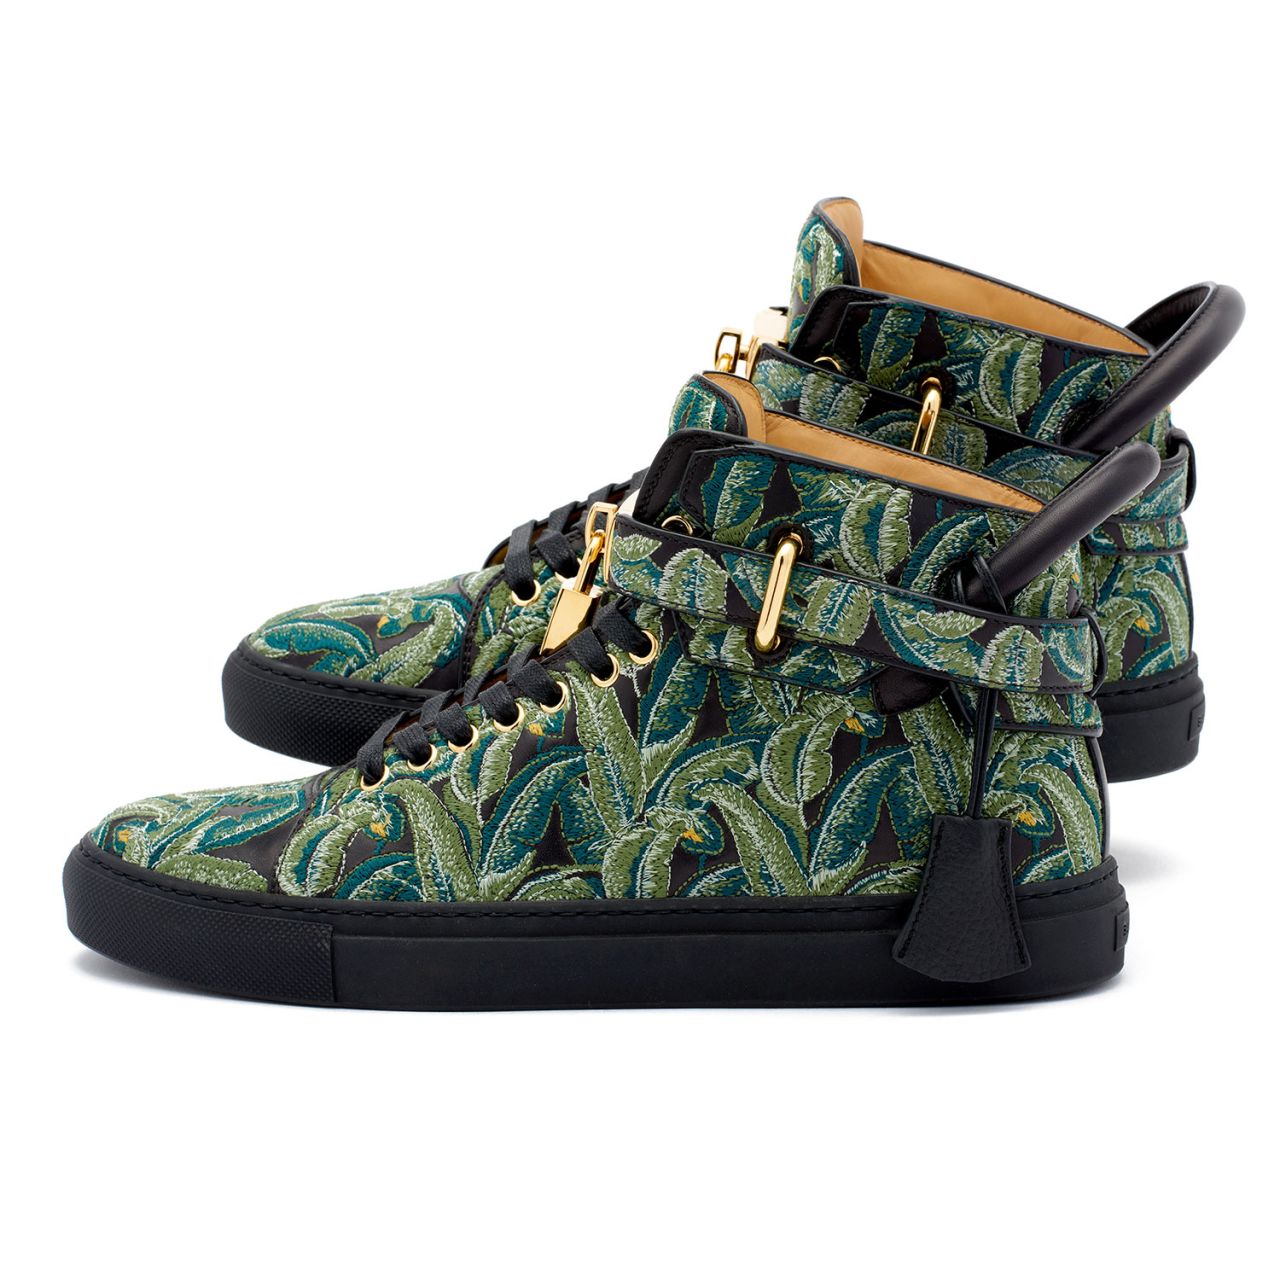 Buscemi 100mm in Palm/Black Green retails for $1,200. 